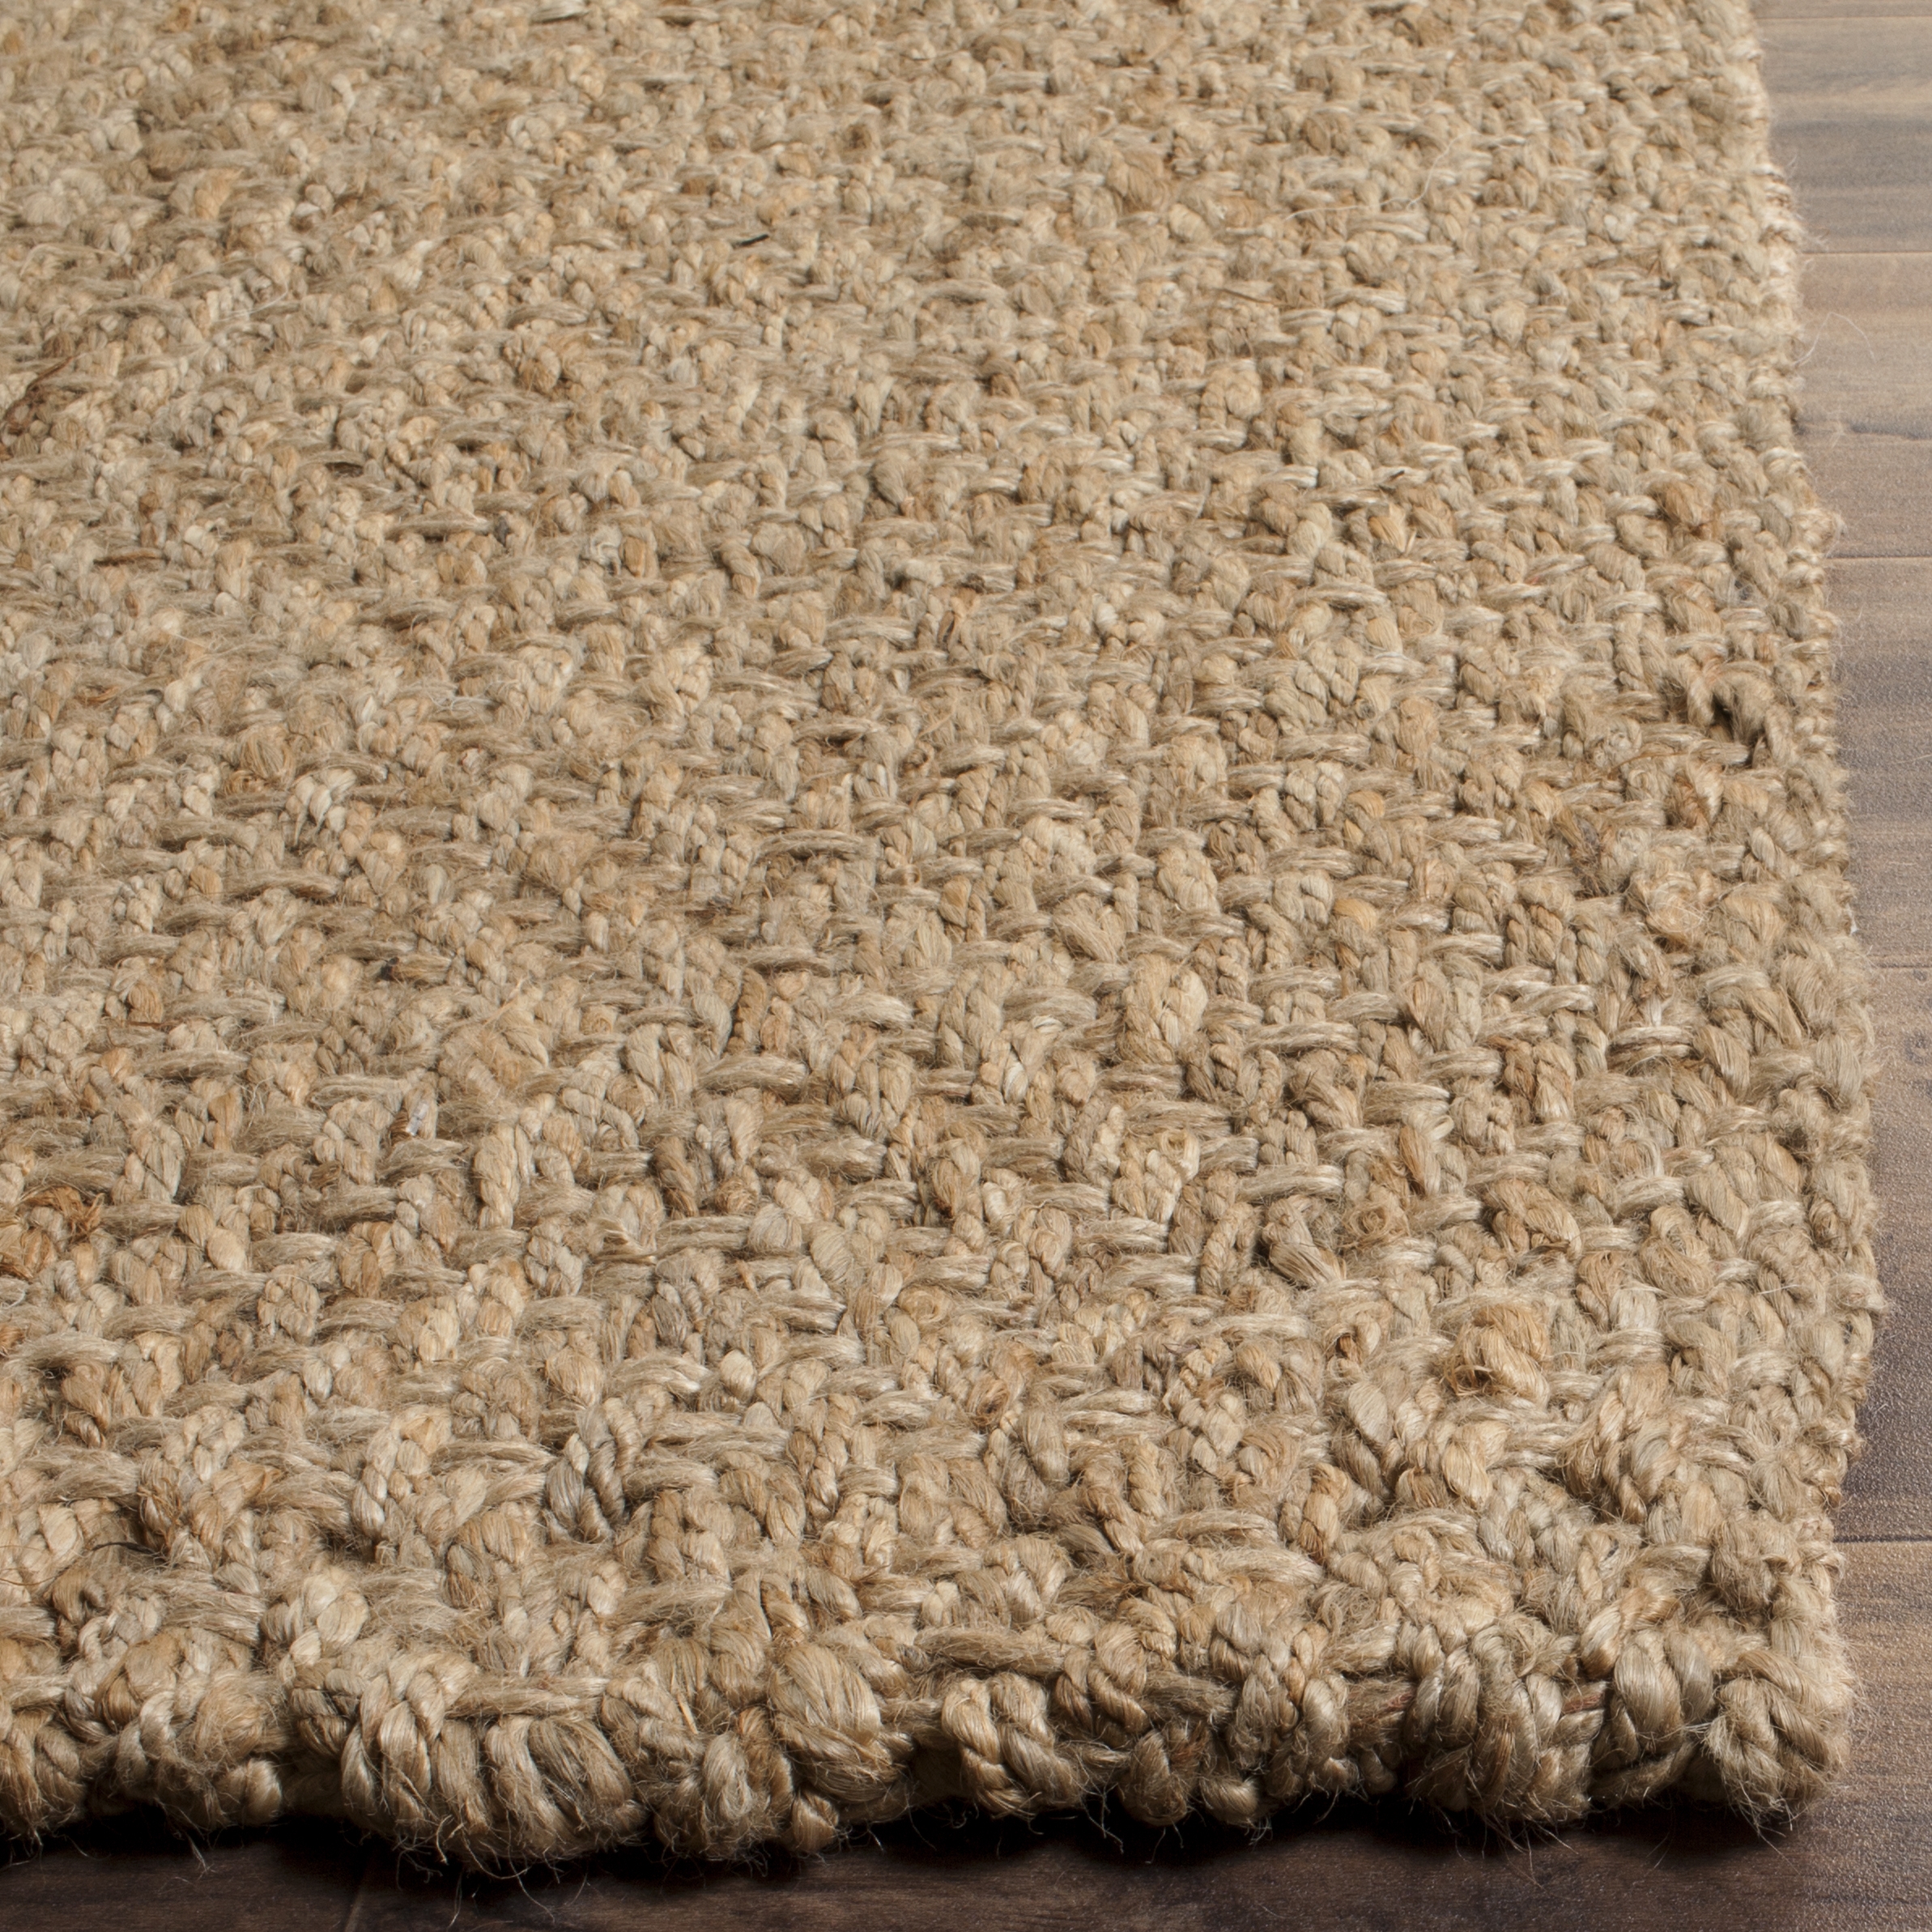 Arlo Home Hand Woven Area Rug, NF181A, Natural/Natural,  9' X 12' - Image 1